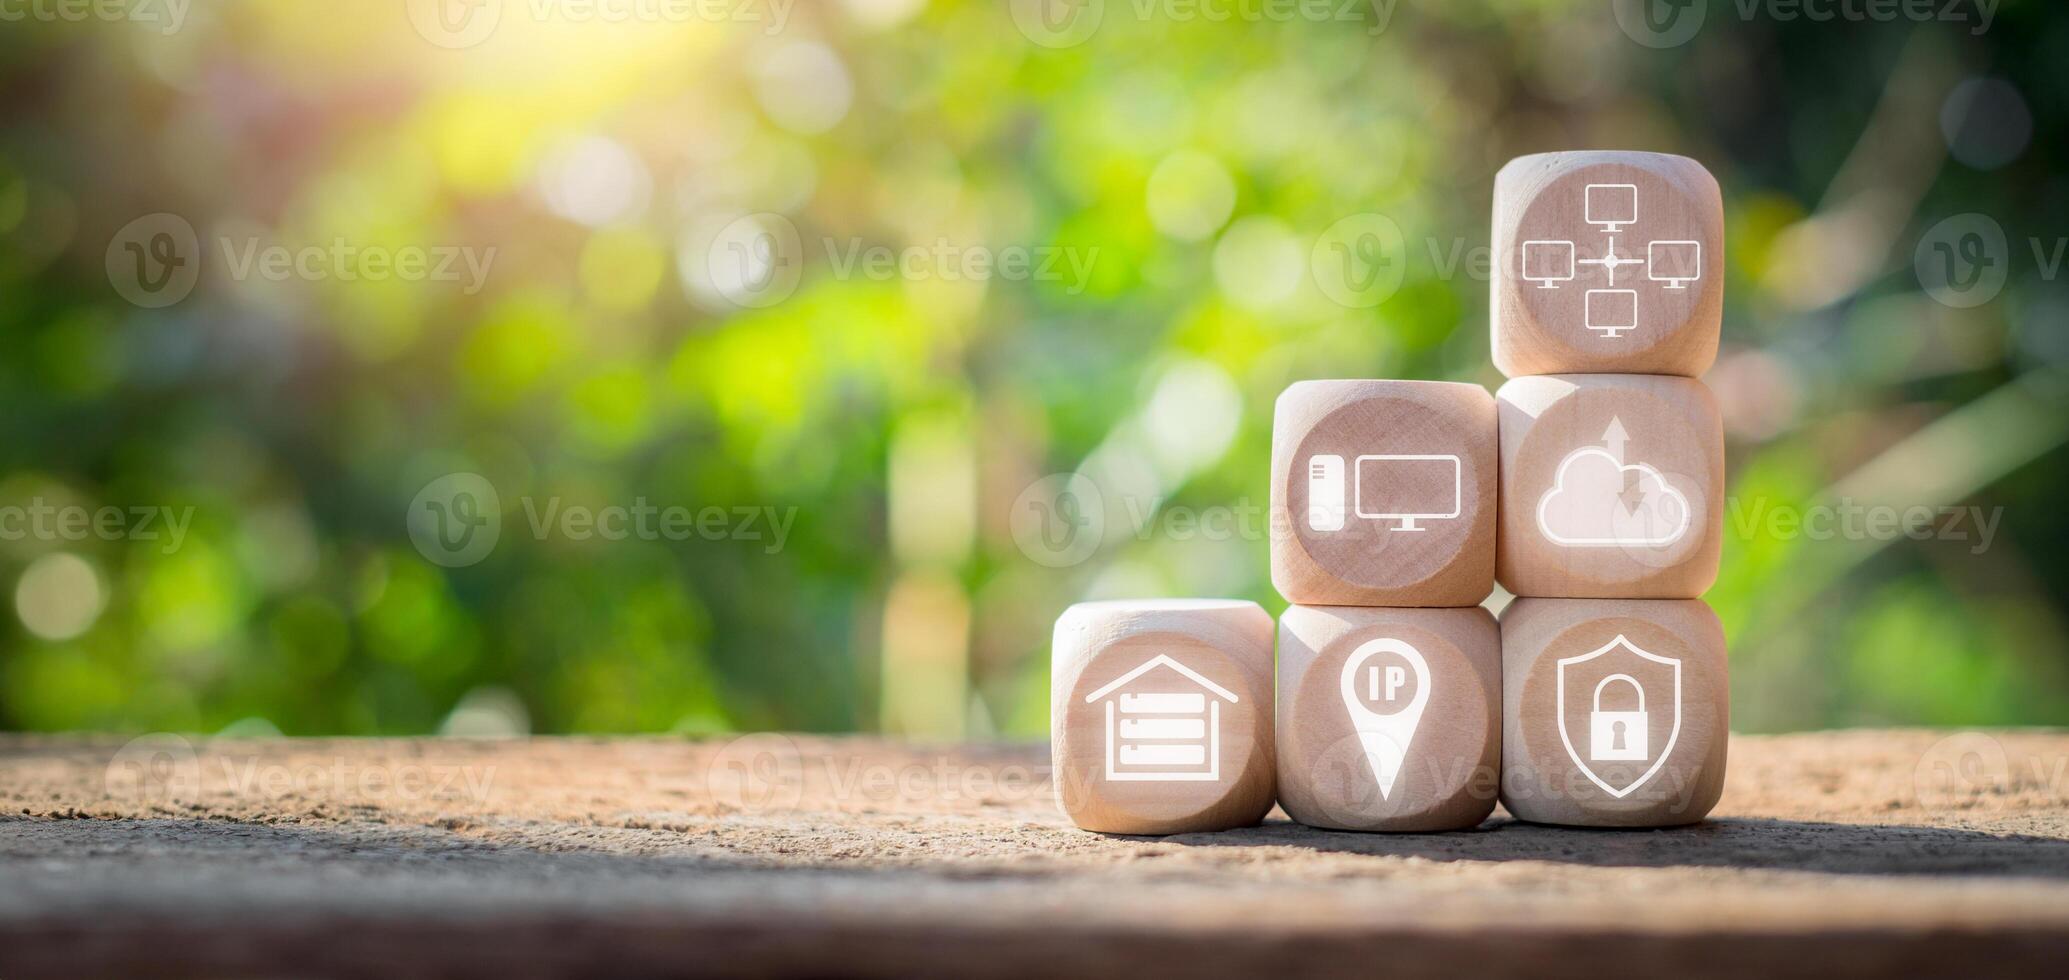 Network technology concept, Wooden block on desk with network technology icon on virtual screen. photo